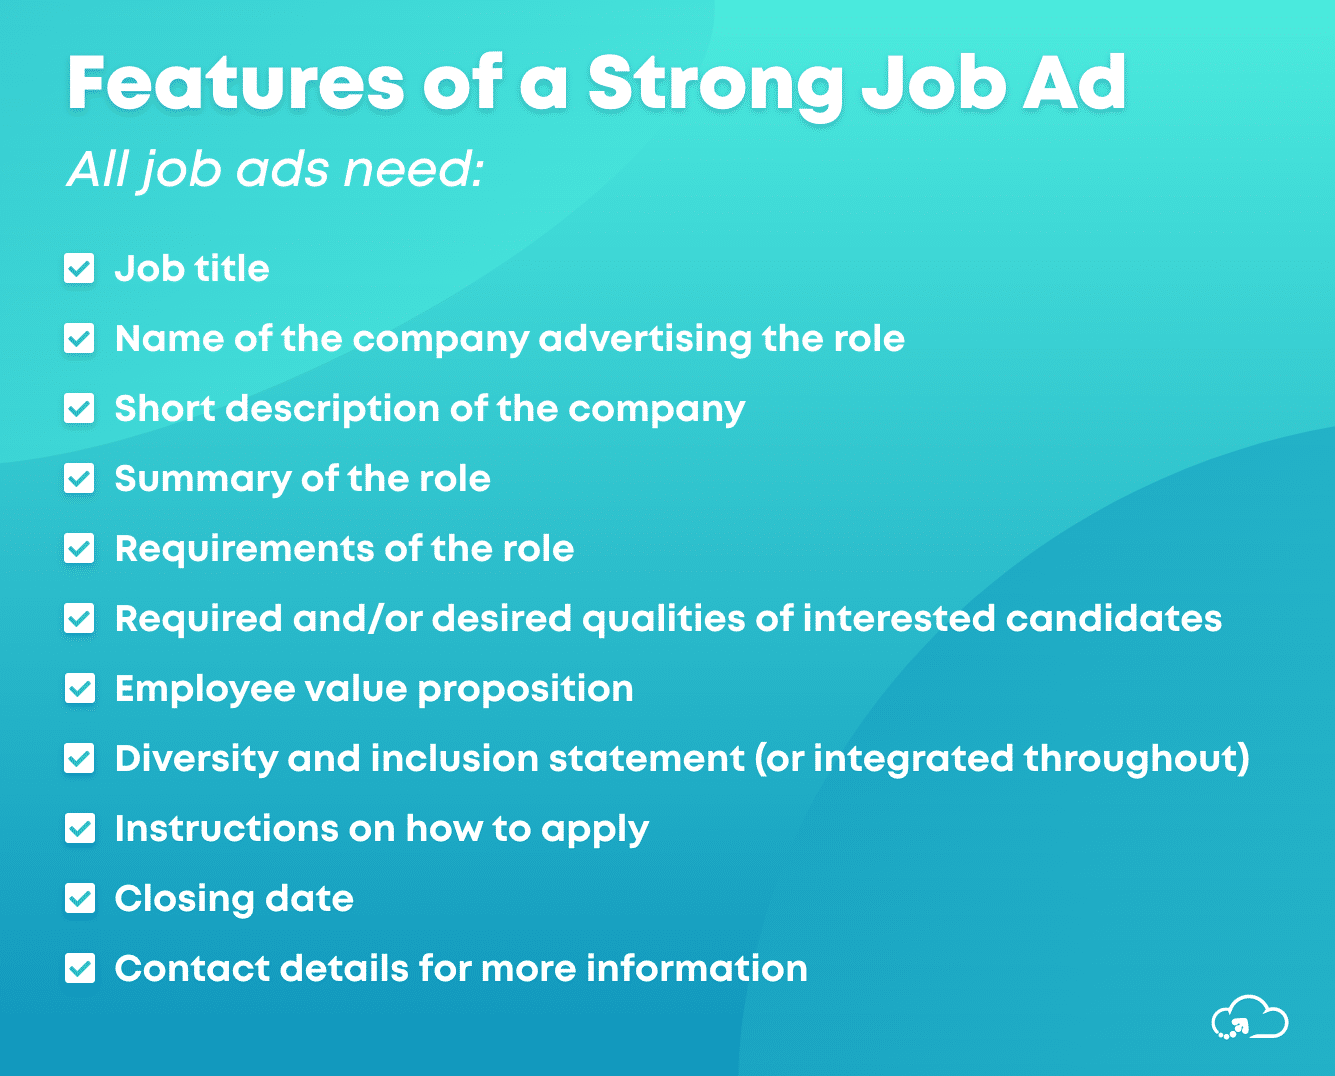 features-of-a-strong-job-ad-checklist